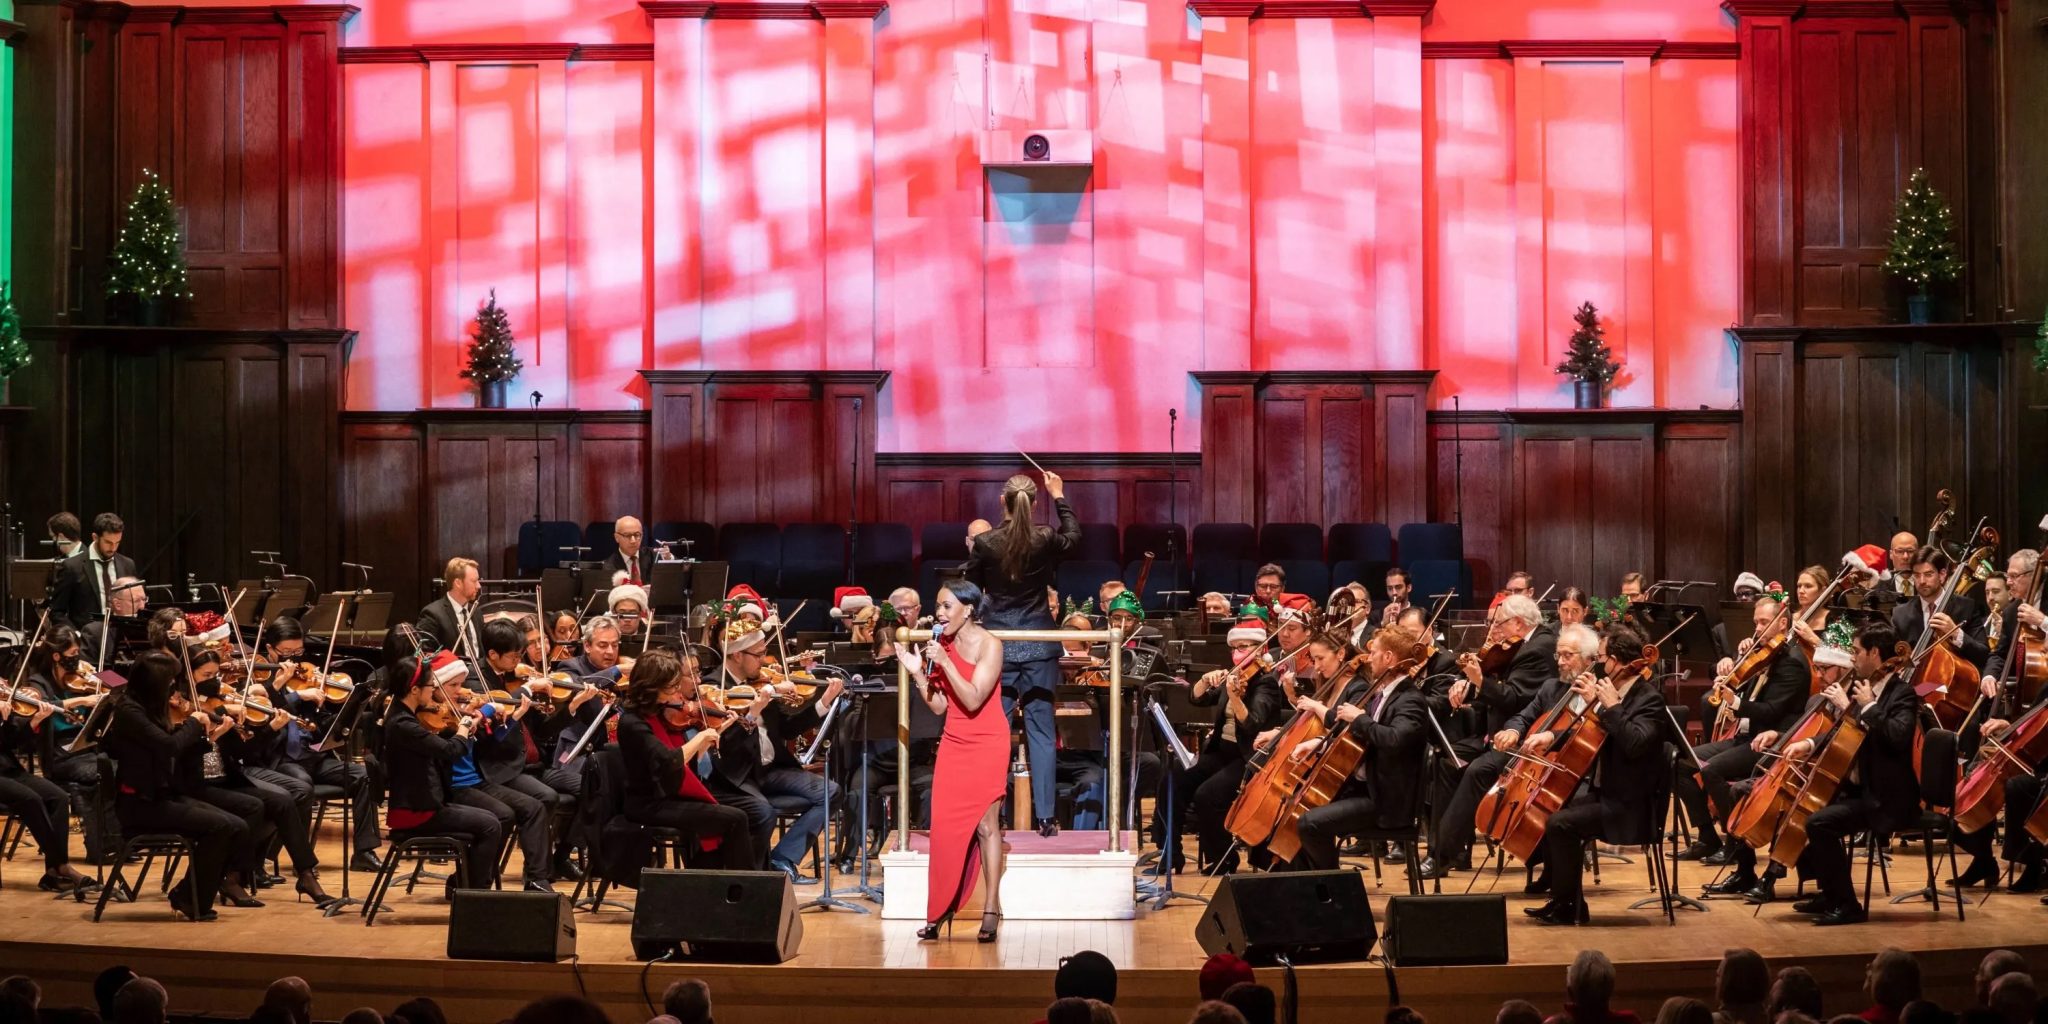 The Detroit Symphony Orchestra performs their Home for the Holidays concert